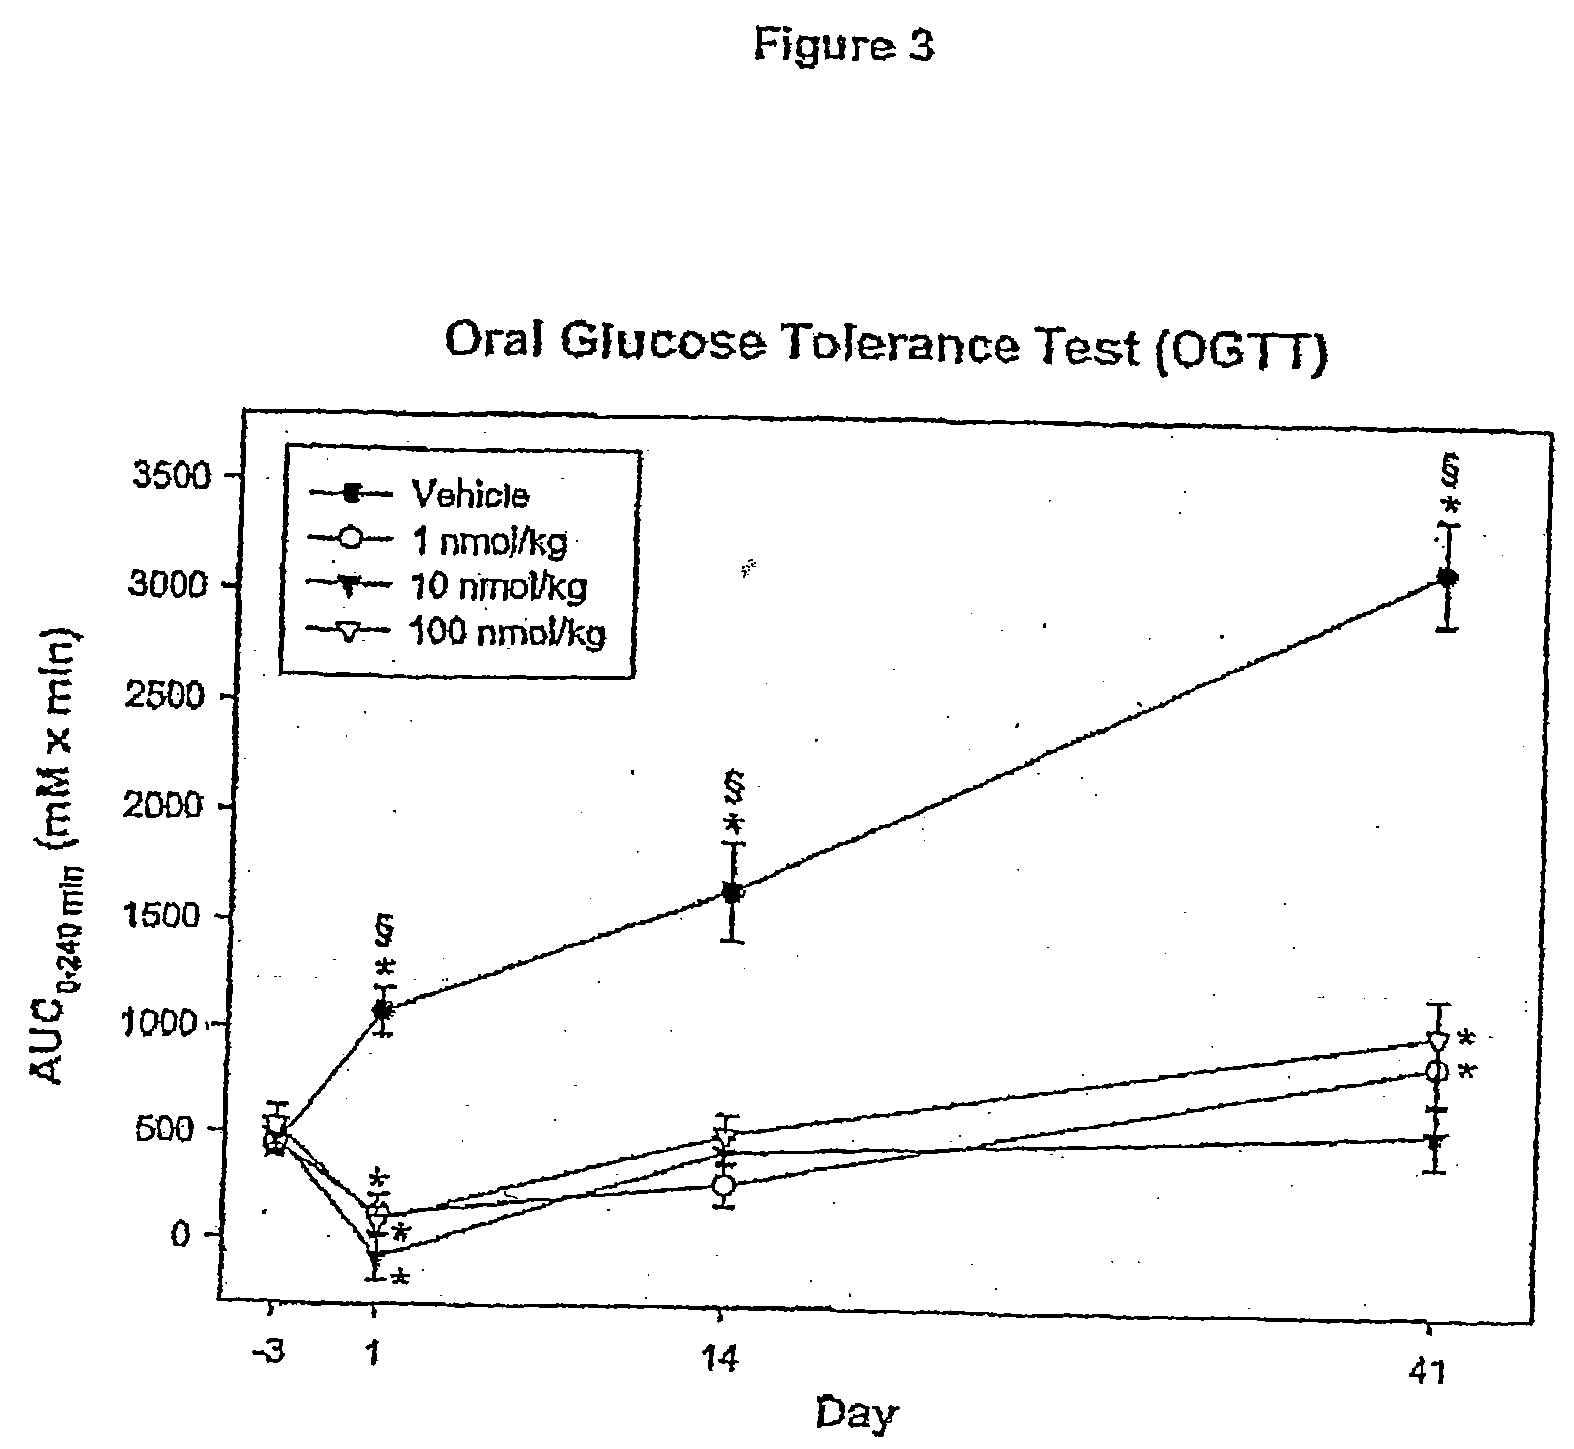 Glp-1 and methods for treating diabetes